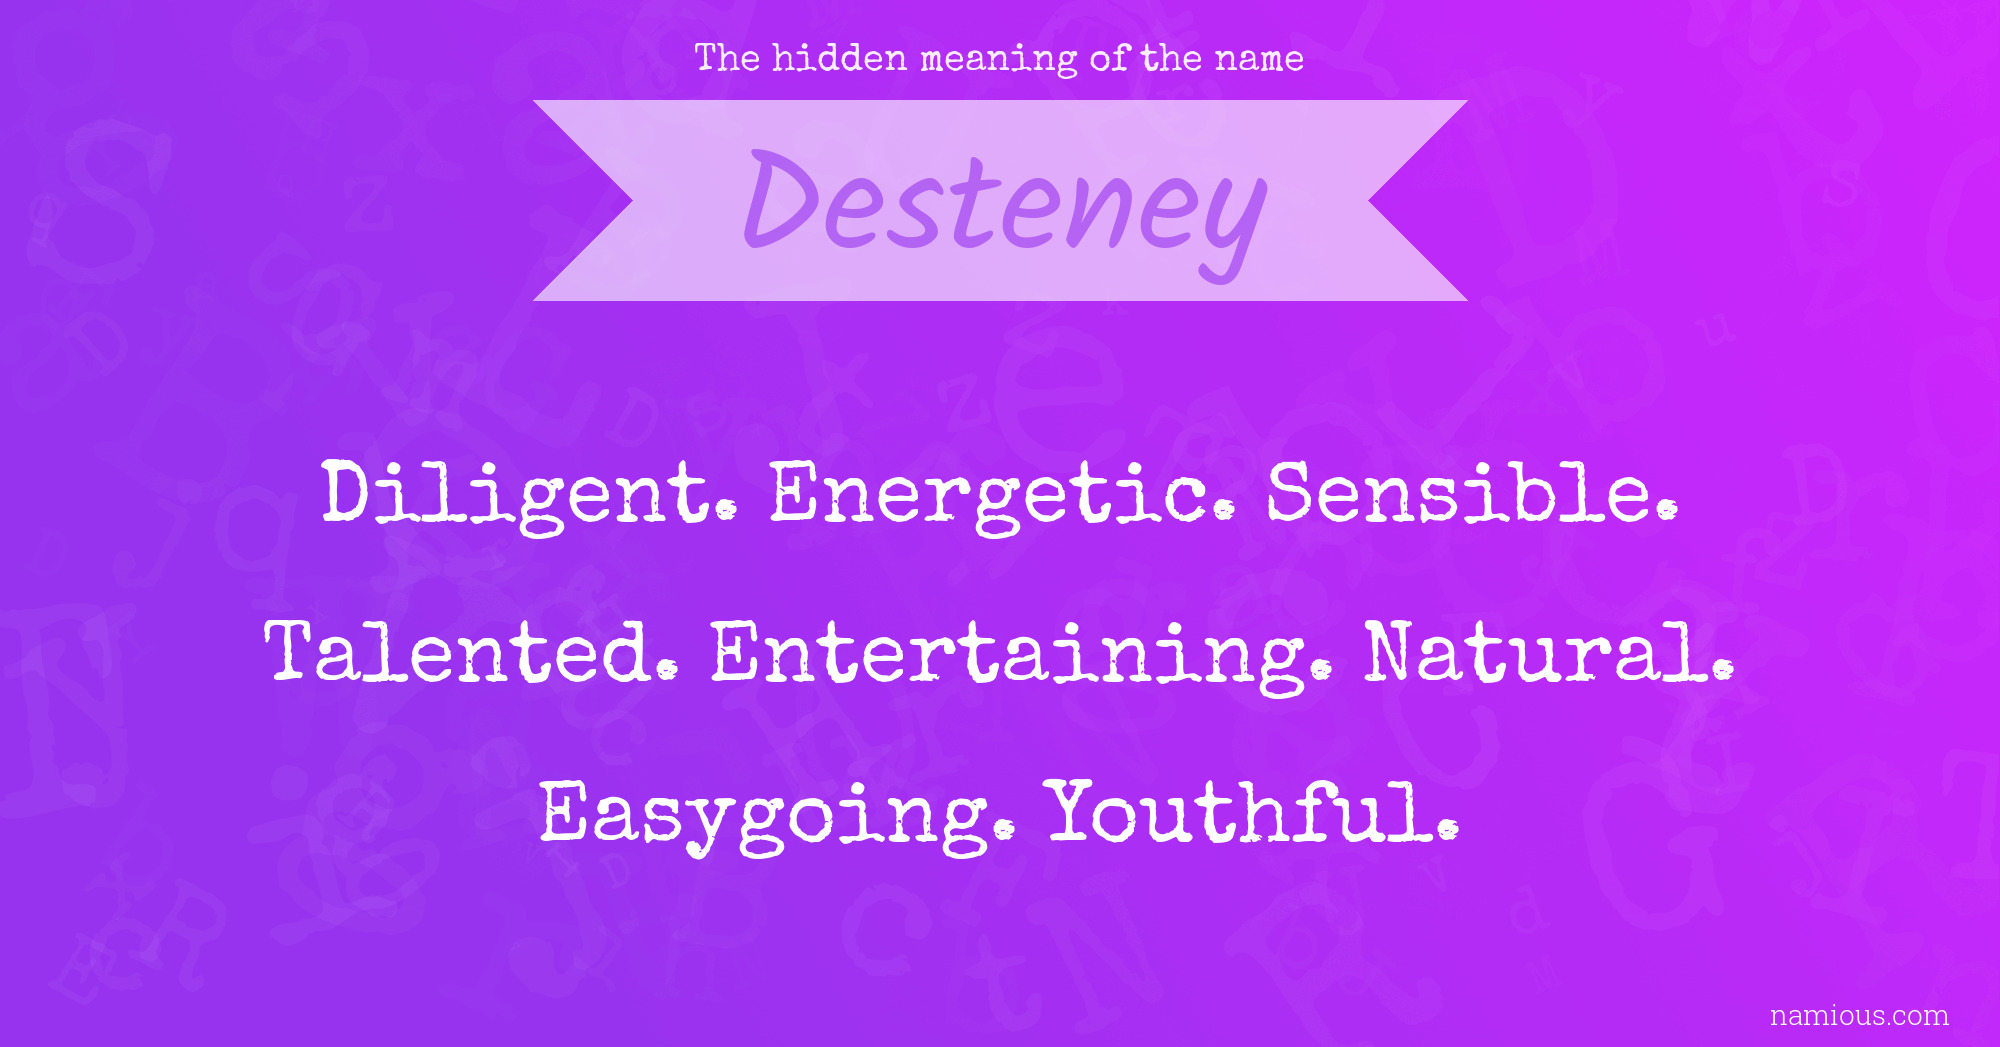 The hidden meaning of the name Desteney